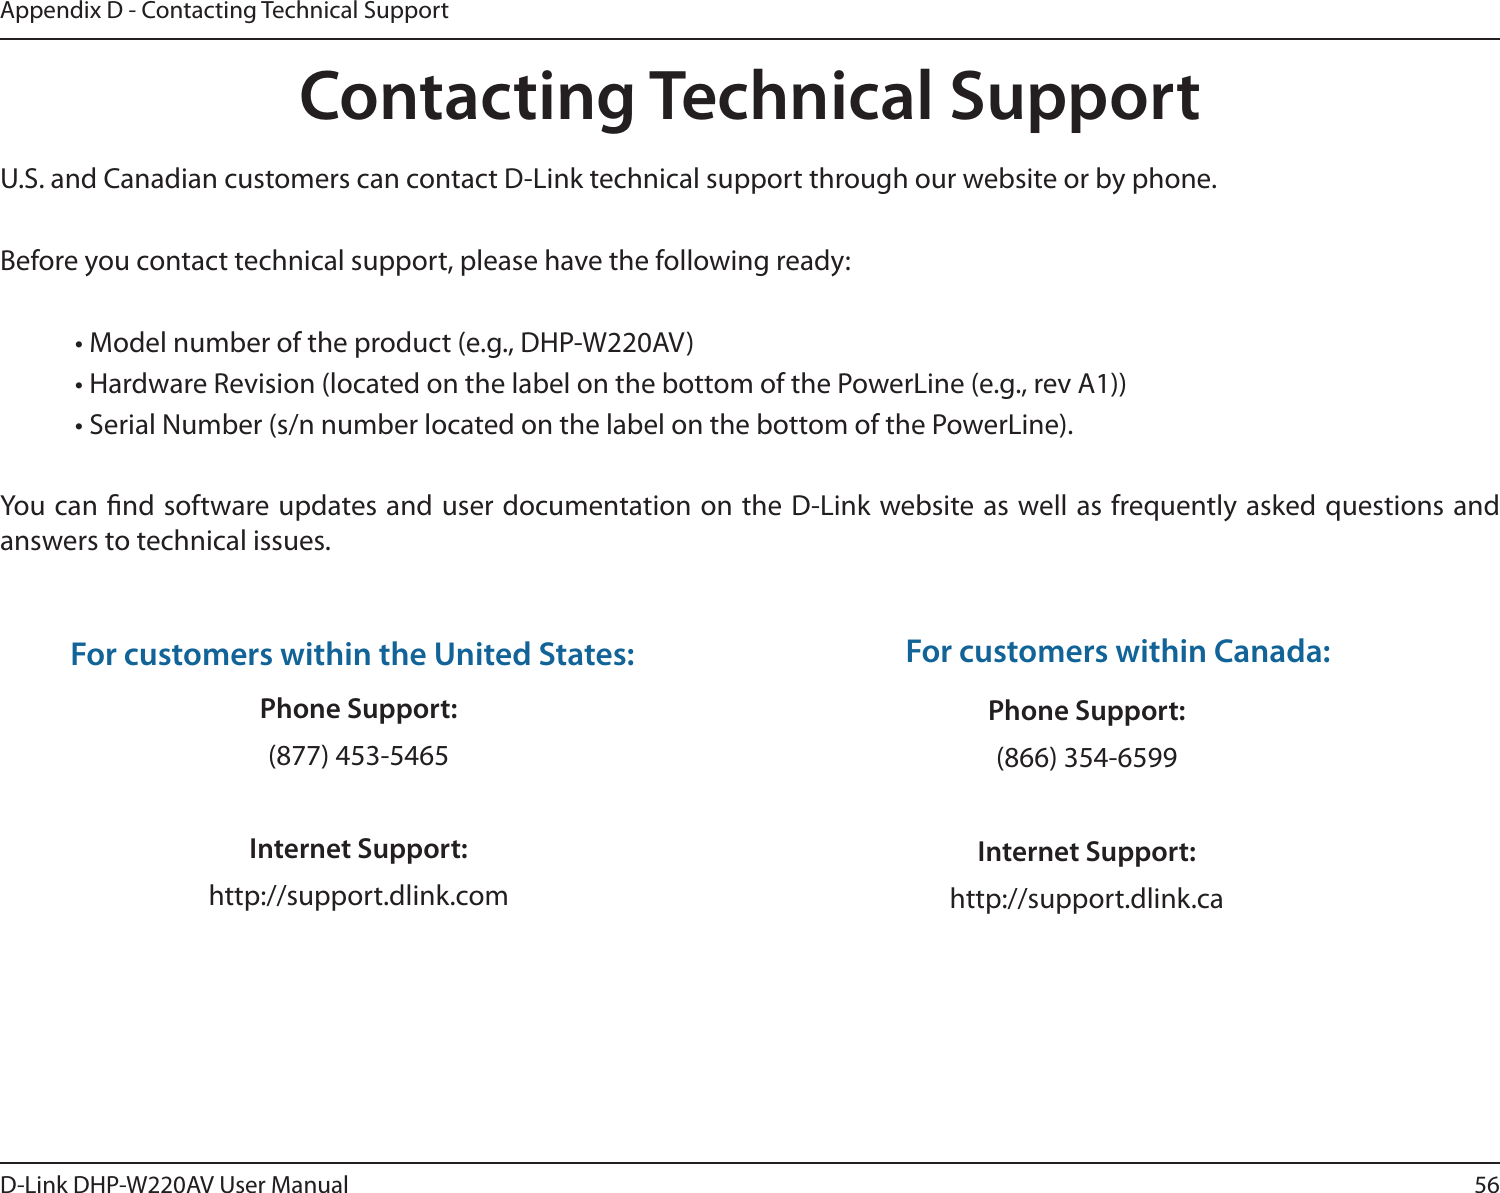 56D-Link DHP-W220AV User ManualAppendix D - Contacting Technical SupportContacting Technical SupportU.S. and Canadian customers can contact D-Link technical support through our website or by phone.Before you contact technical support, please have the following ready:  • Model number of the product (e.g., DHP-W220AV)  • Hardware Revision (located on the label on the bottom of the PowerLine (e.g., rev A1))  • Serial Number (s/n number located on the label on the bottom of the PowerLine). You can nd software updates and user documentation on the D-Link website as well as frequently asked questions and answers to technical issues.For customers within the United States:Phone Support:(877) 453-5465Internet Support:http://support.dlink.com For customers within Canada:Phone Support:(866) 354-6599 Internet Support:http://support.dlink.ca 